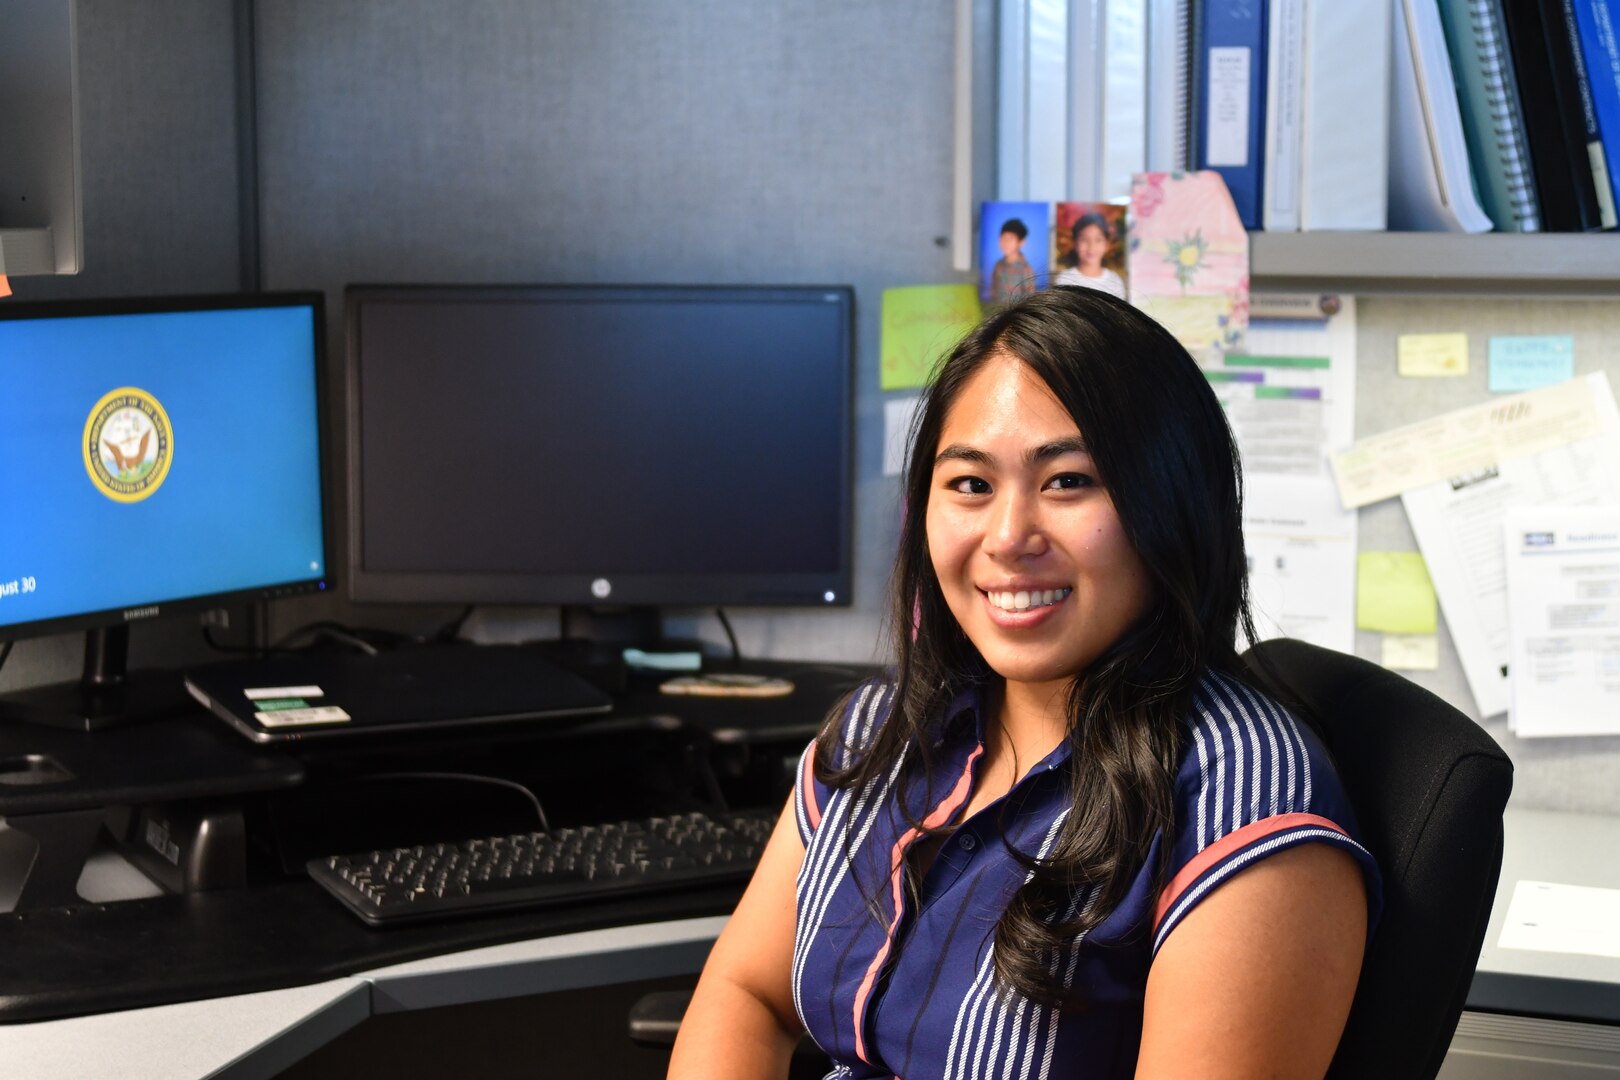 Victoria Le is a contract specialist at Naval Surface Warfare Center Dahlgren Division.